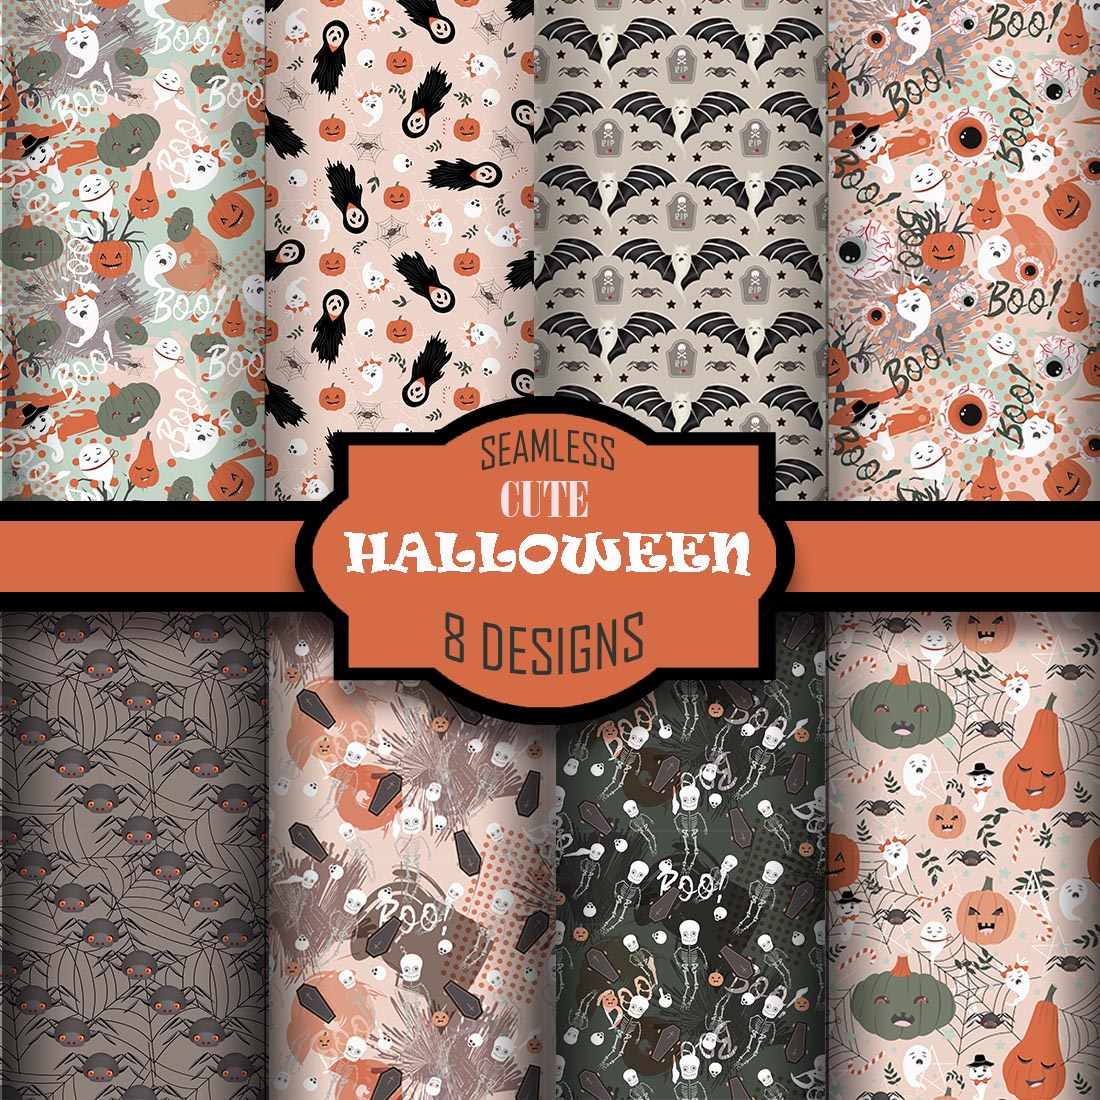 Pumpkin and Ghost Print Halloween Spooky Pattern cover image.